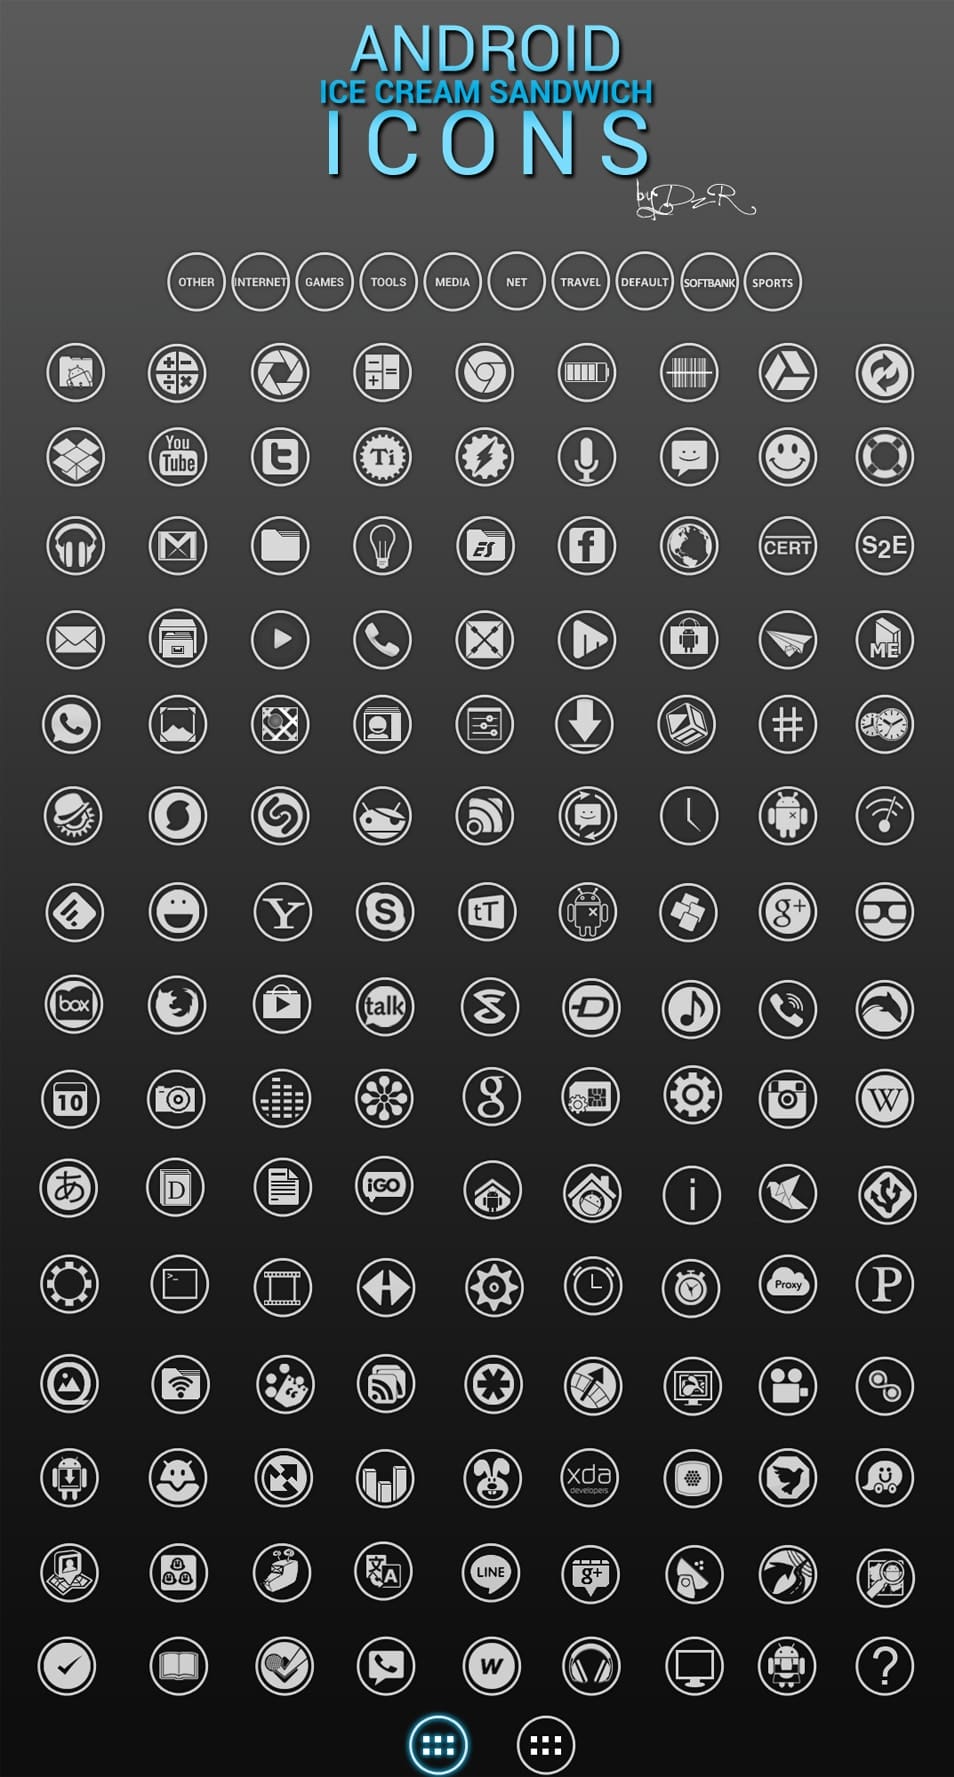 Android Ice Cream Sandwich Icons v3.1